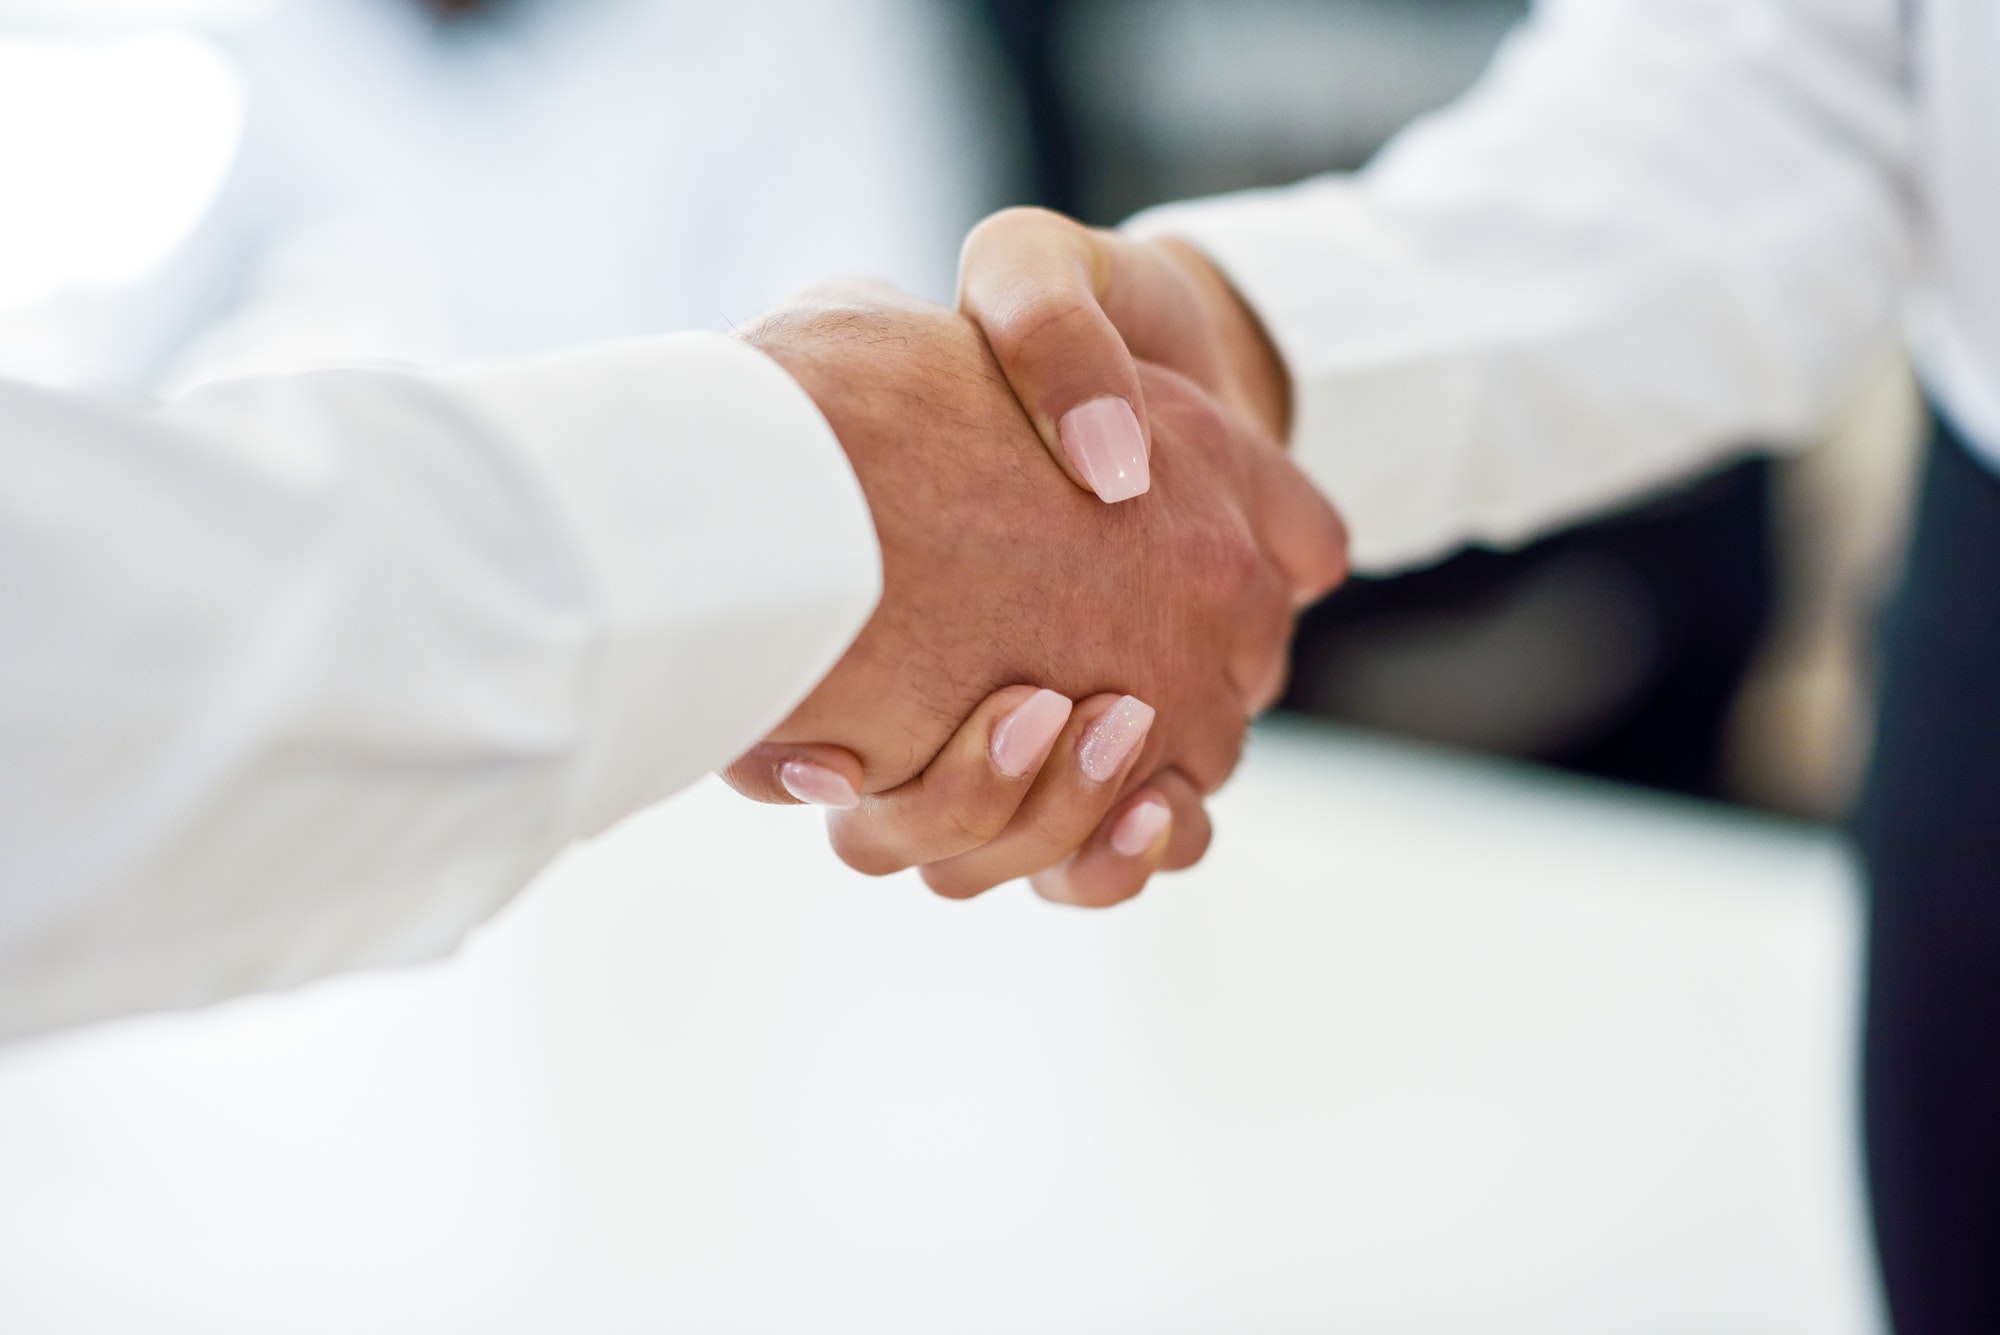 Caucasian businessman shaking hands with businesswoman in an off